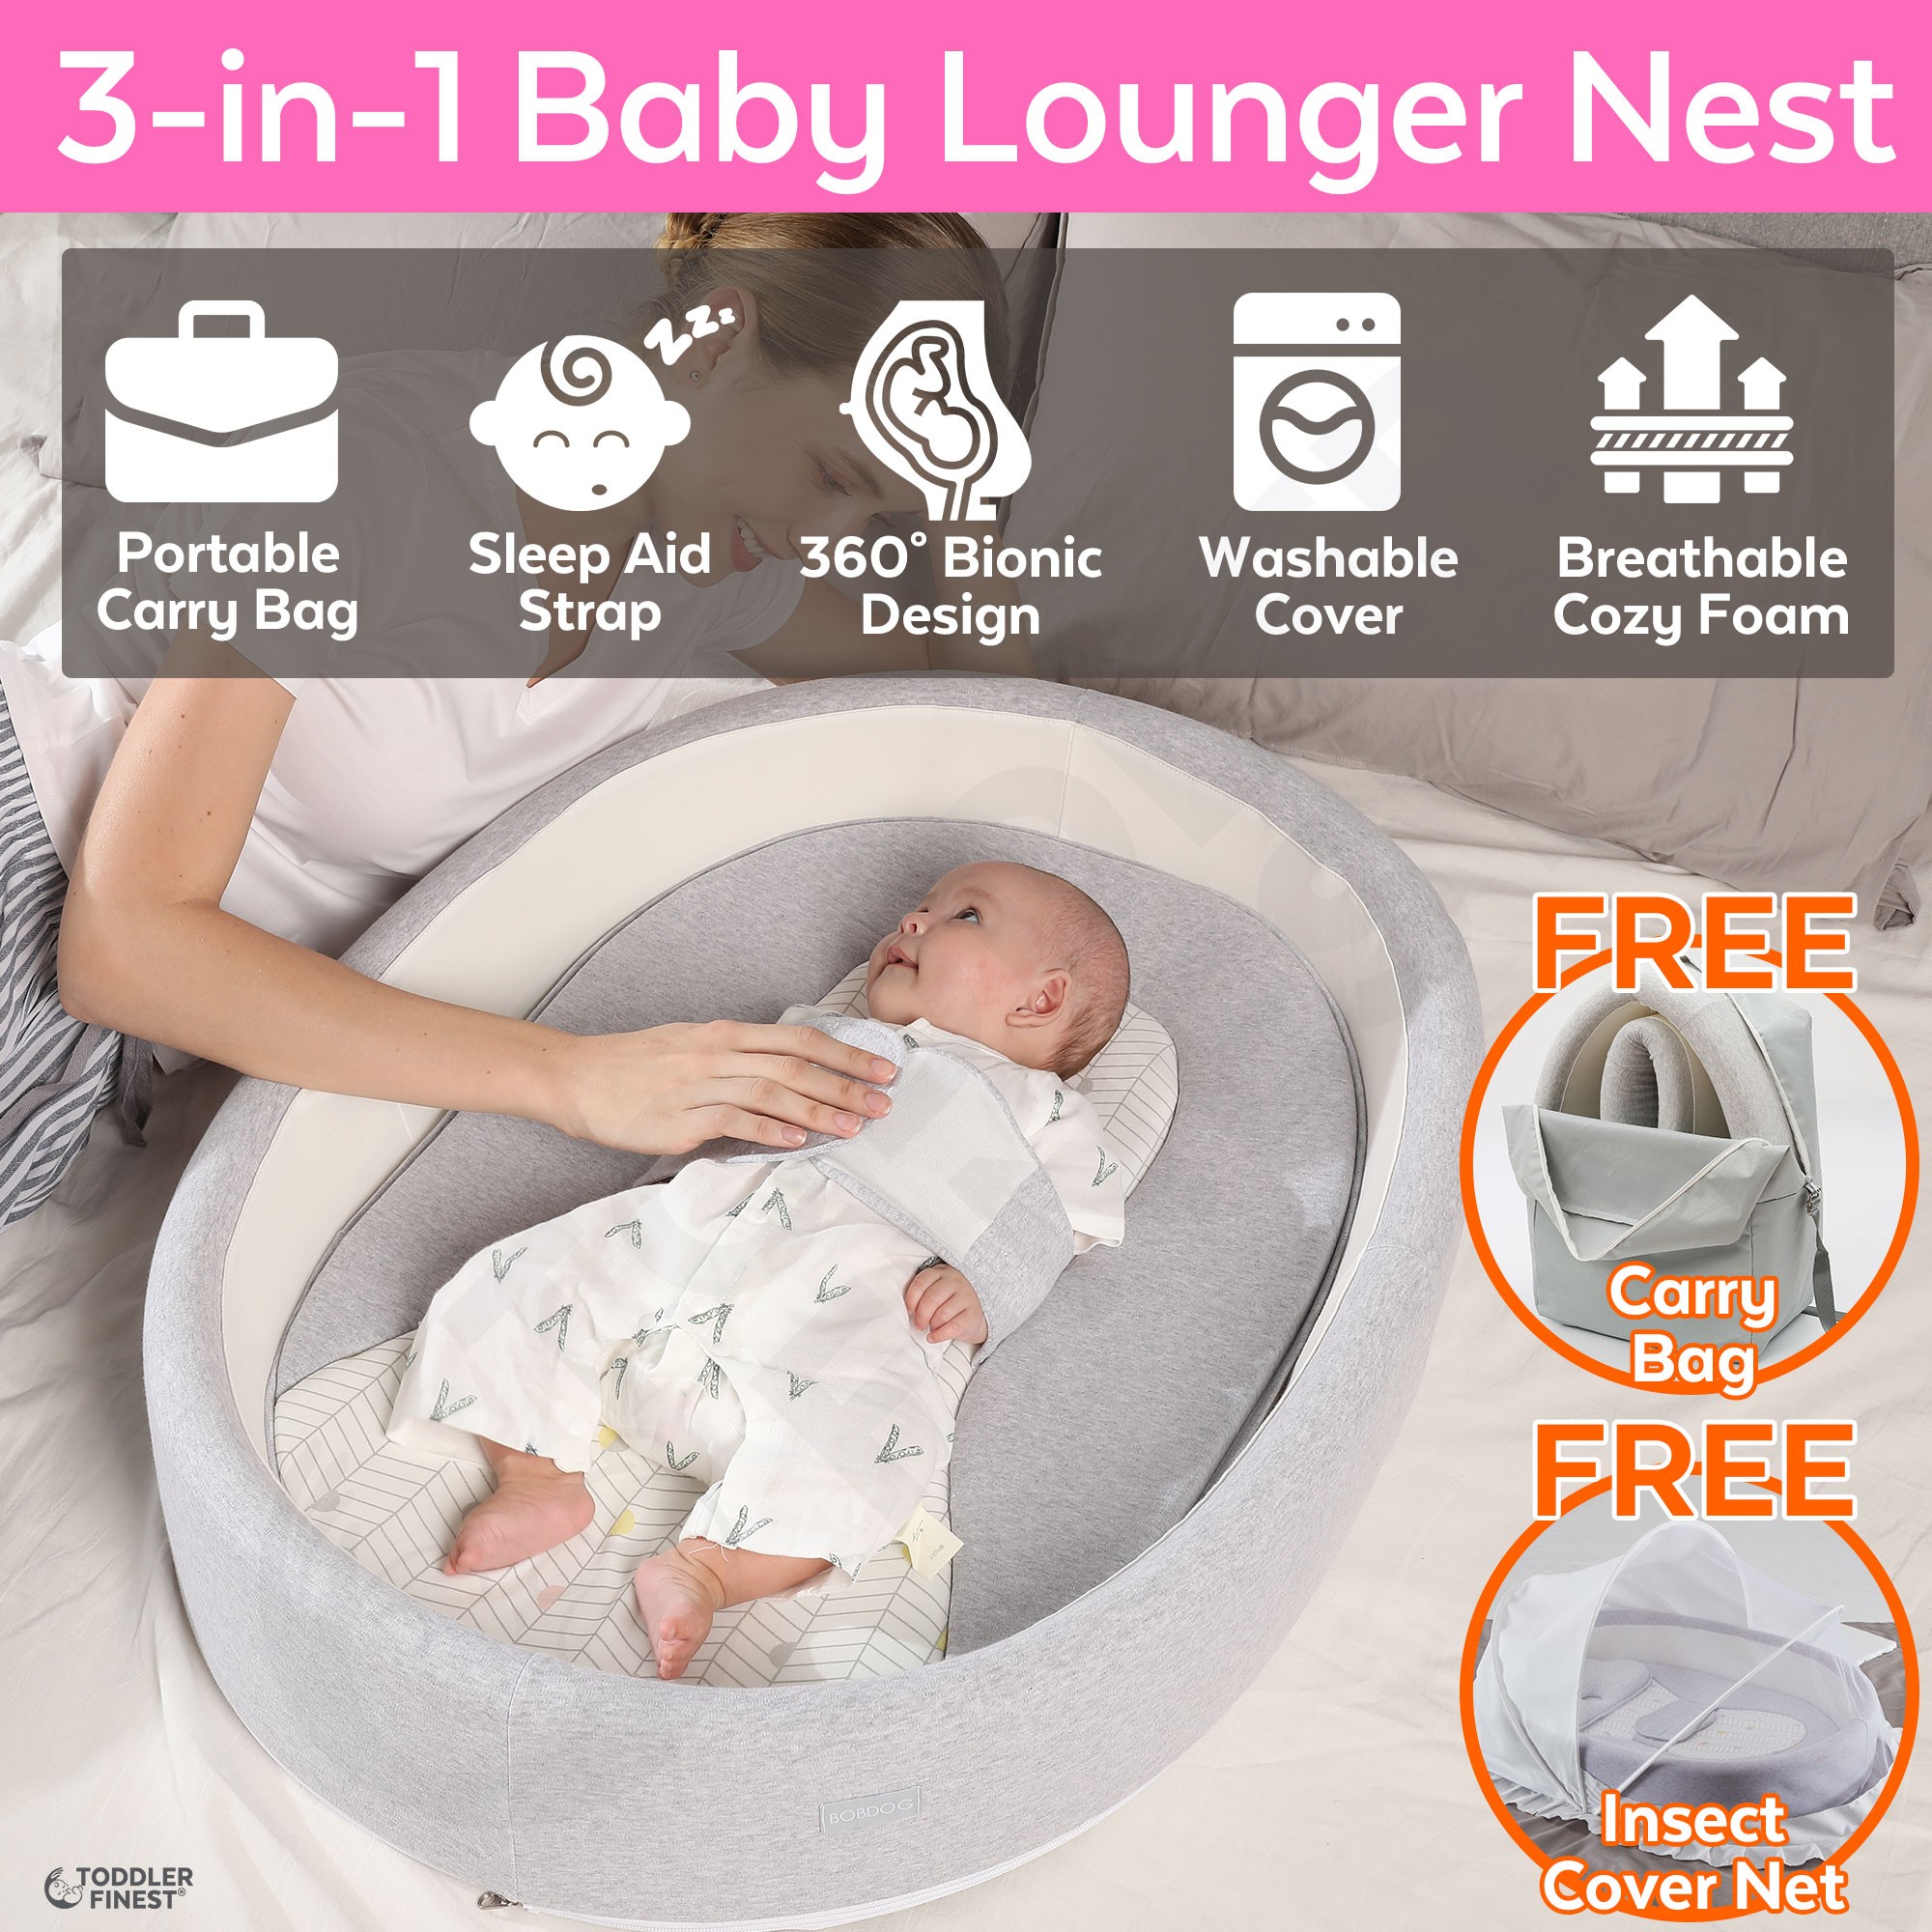 VOLBABY Baby Lounger Nest,Portable Crib and Bassinet Perfect for Co Sleeping,Super Soft and Breathable Newborn Lounger Cushion Suitable from 0-36 Months Detachable & Machine Washable 